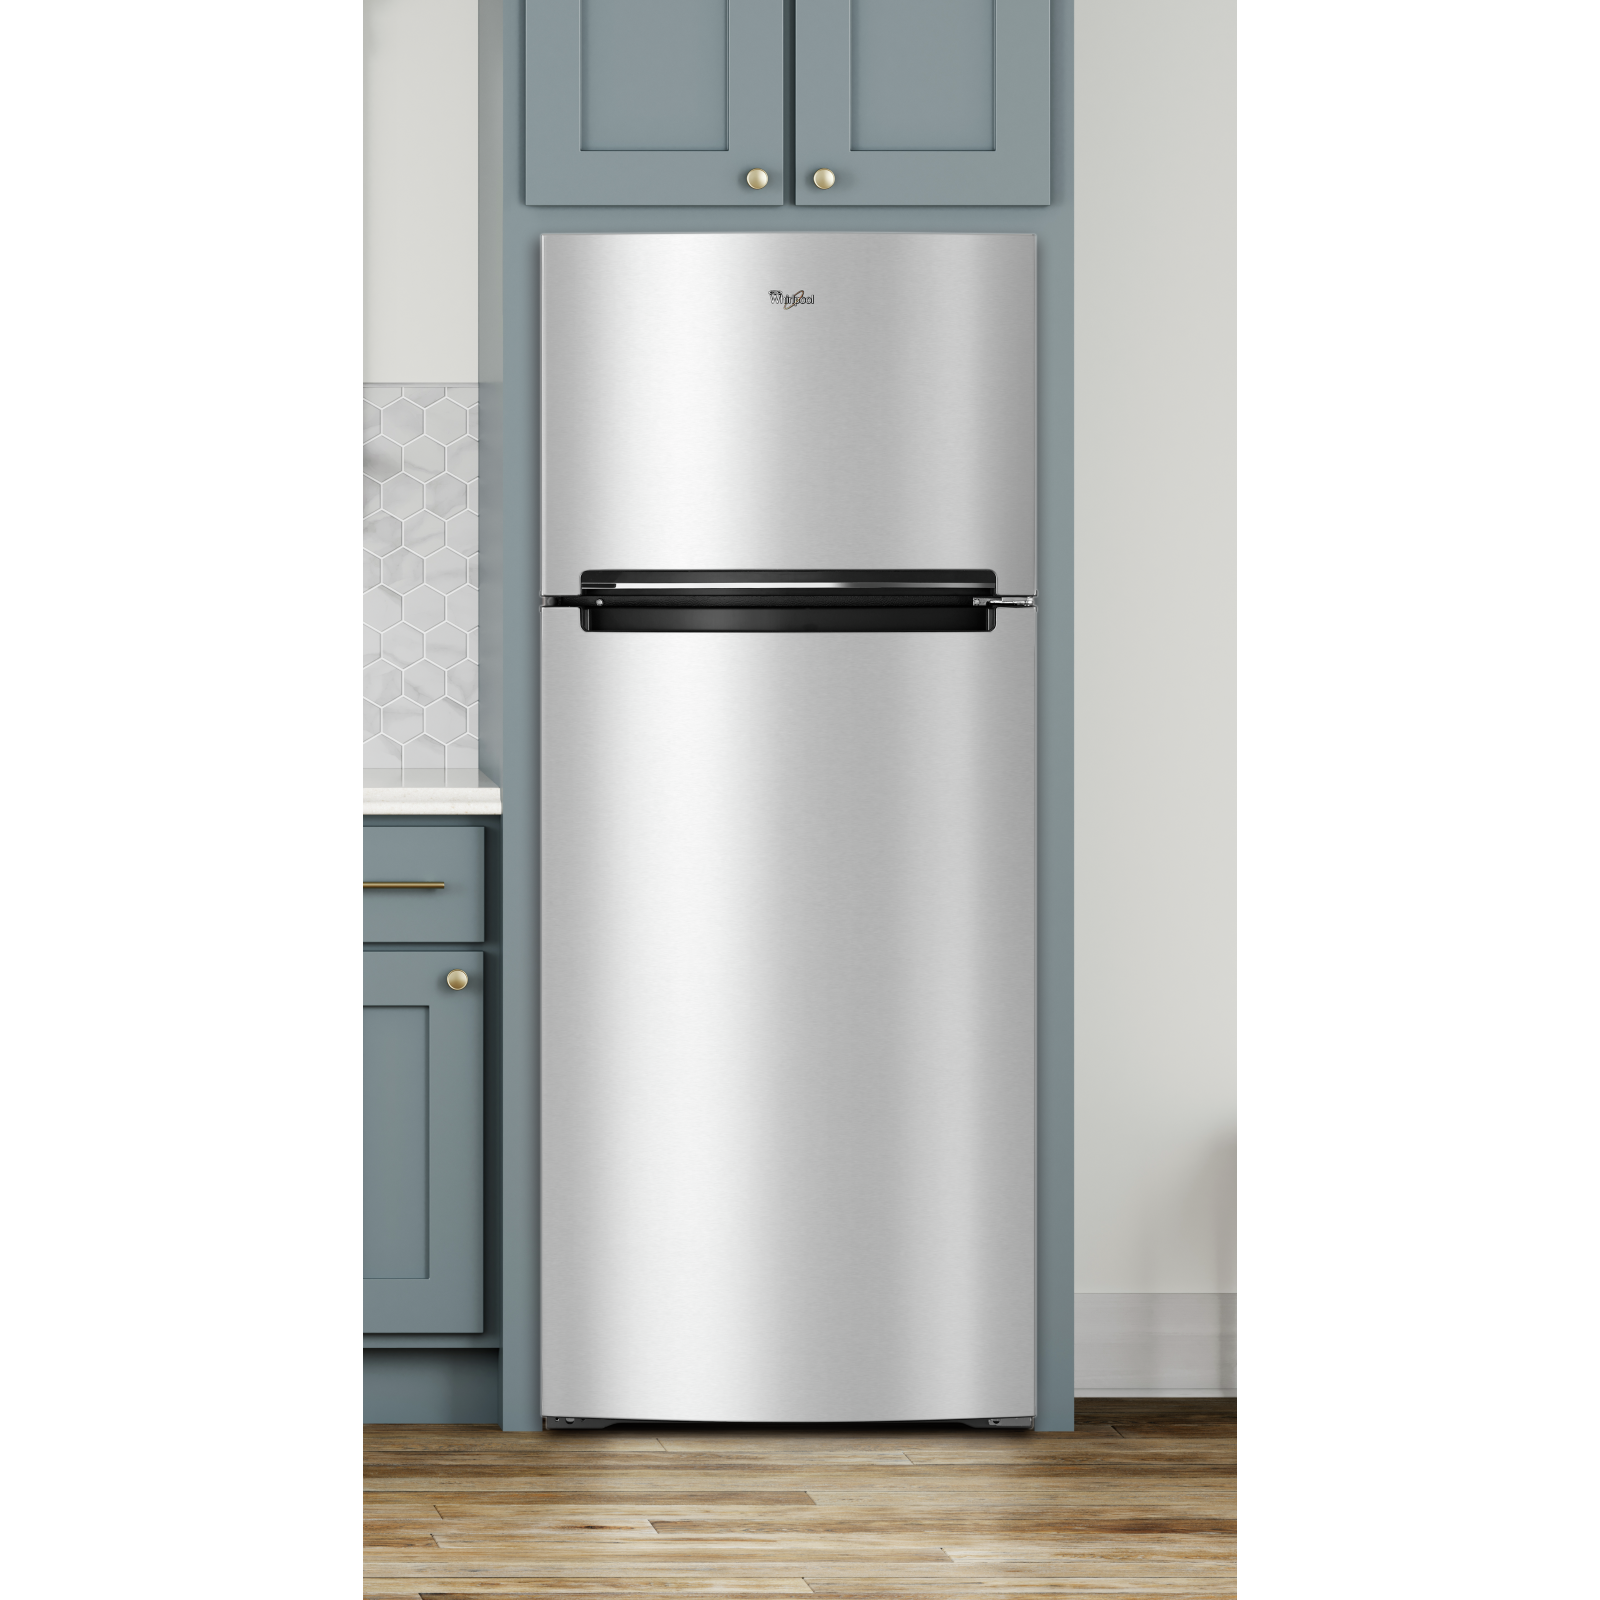 Whirlpool - 28 Inch 17.64 cu. ft Top Mount Refrigerator in Stainless - WRT518SZFG